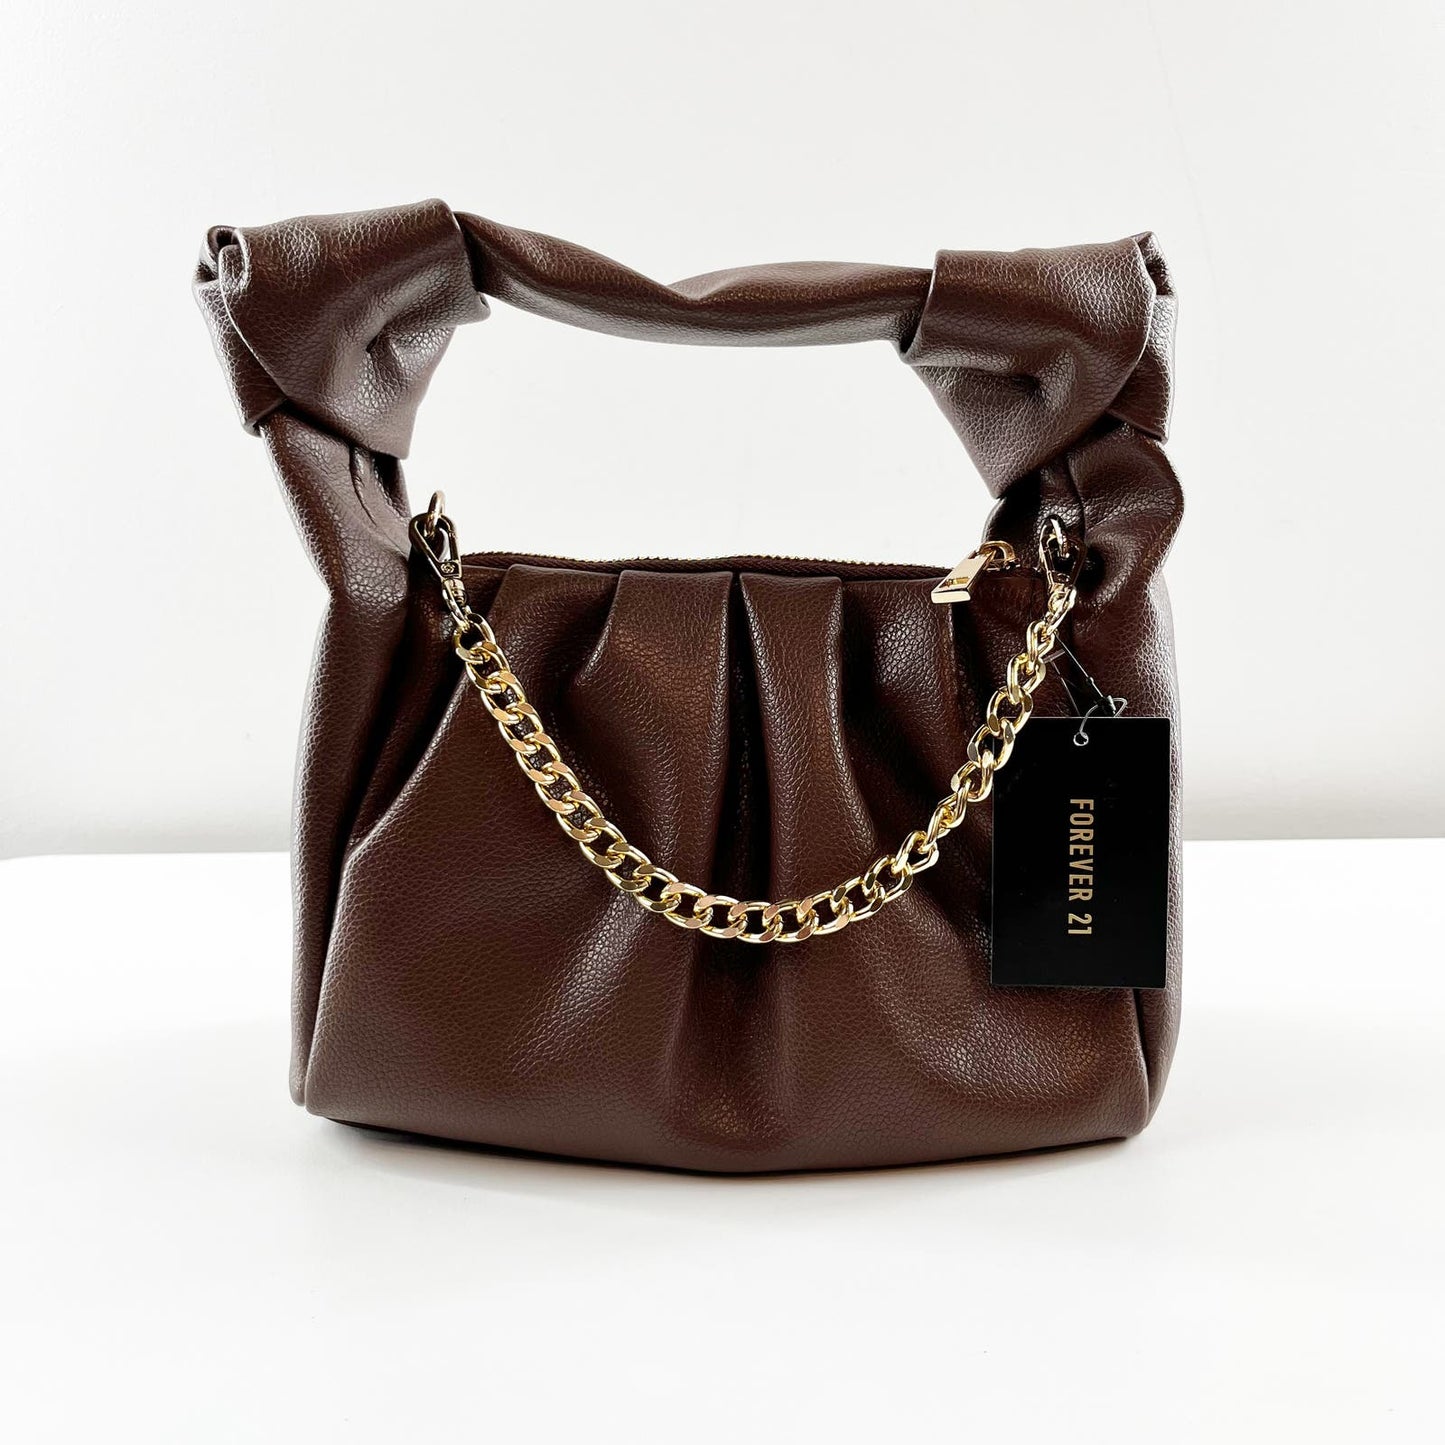 Forever 21 Faux Leather Gold Chain Bagette Mini Bag Purse Chocolate Brown